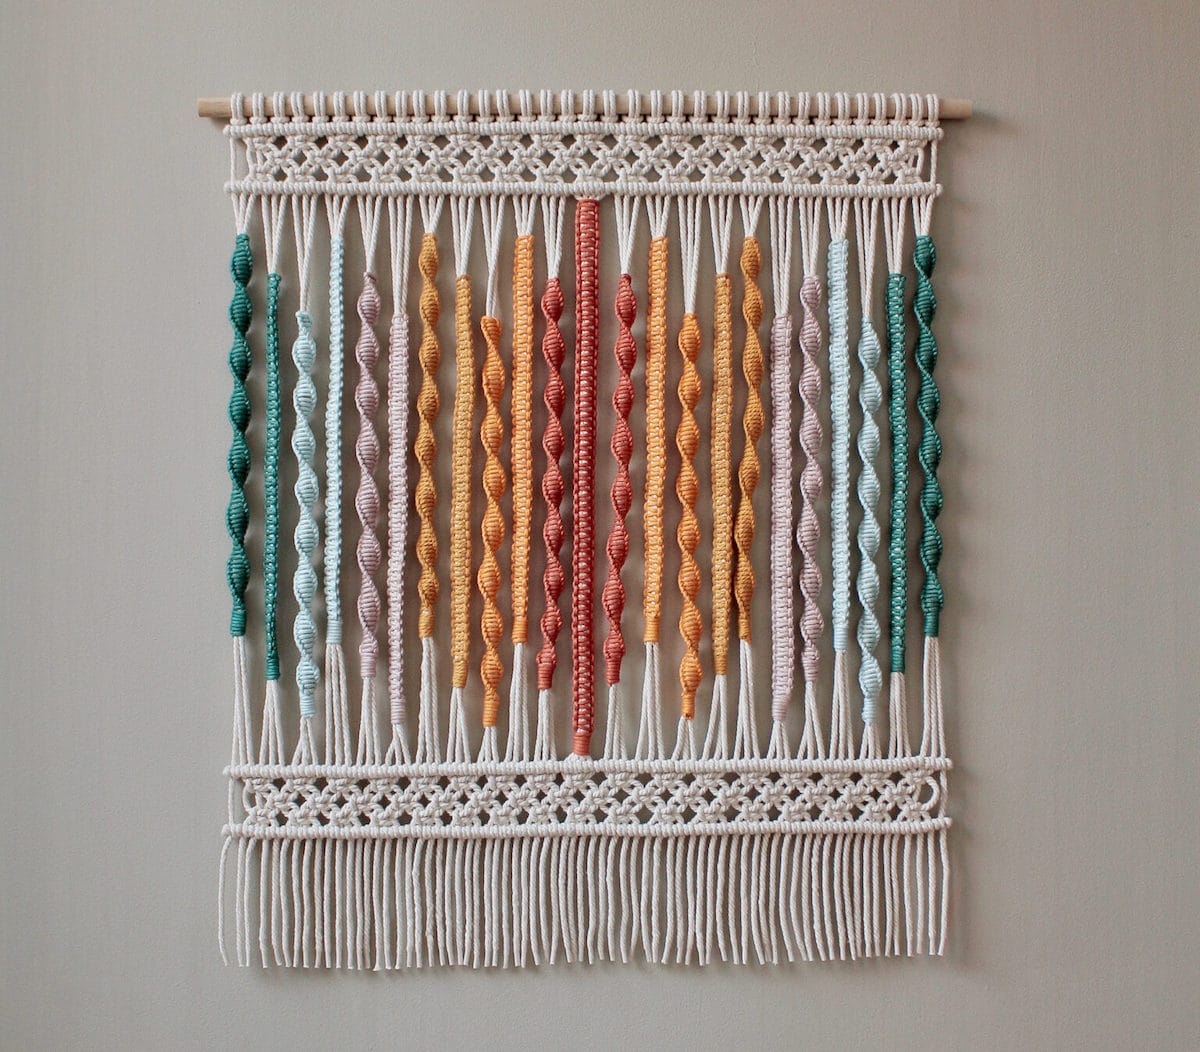 Rainbow Macramé Wall Hangings Dazzle With Intricate Knots of All Kinds ...